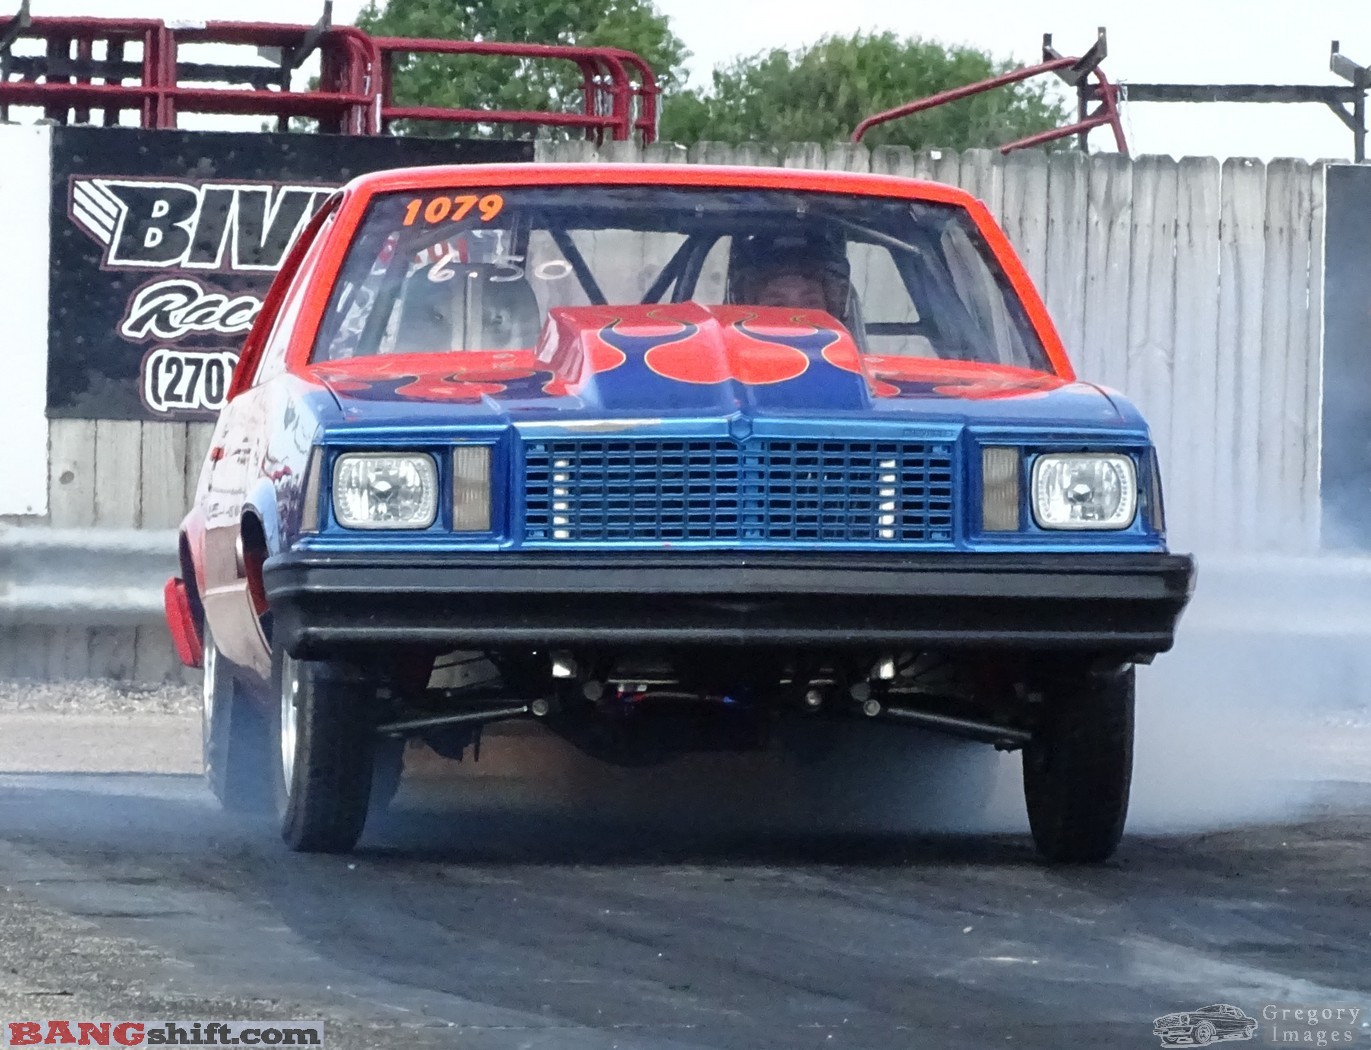 Bracket Racing USA – Here’s A Look At The Sportsman Action From US60 Dragway In Kentucky